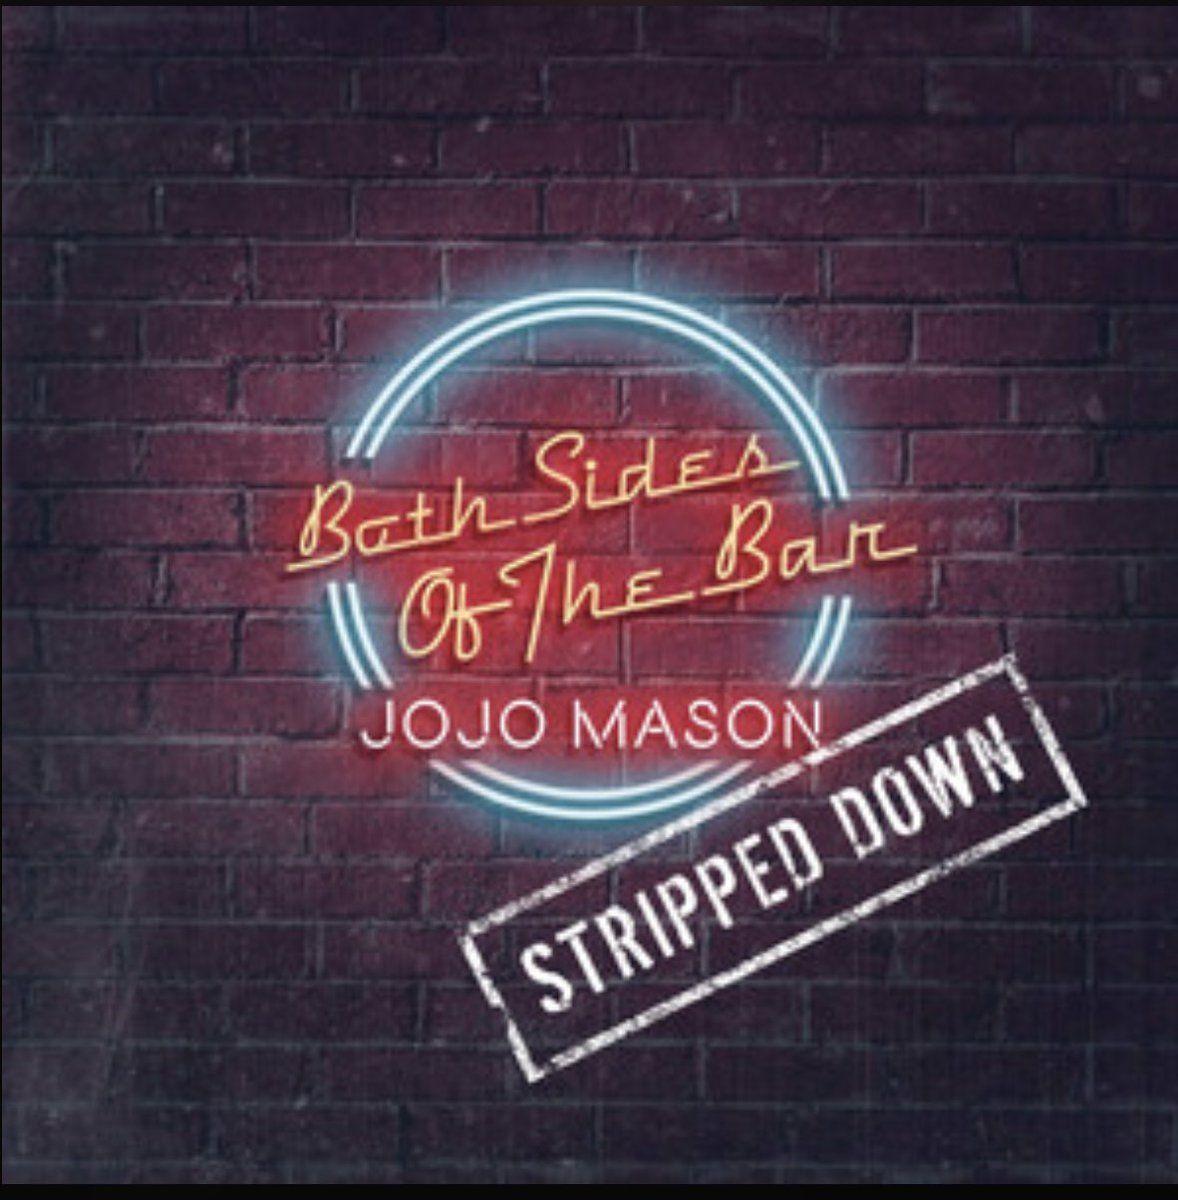 Stripped Y Logo - JoJo Mason is the 1 Year Anniversary of my Debut